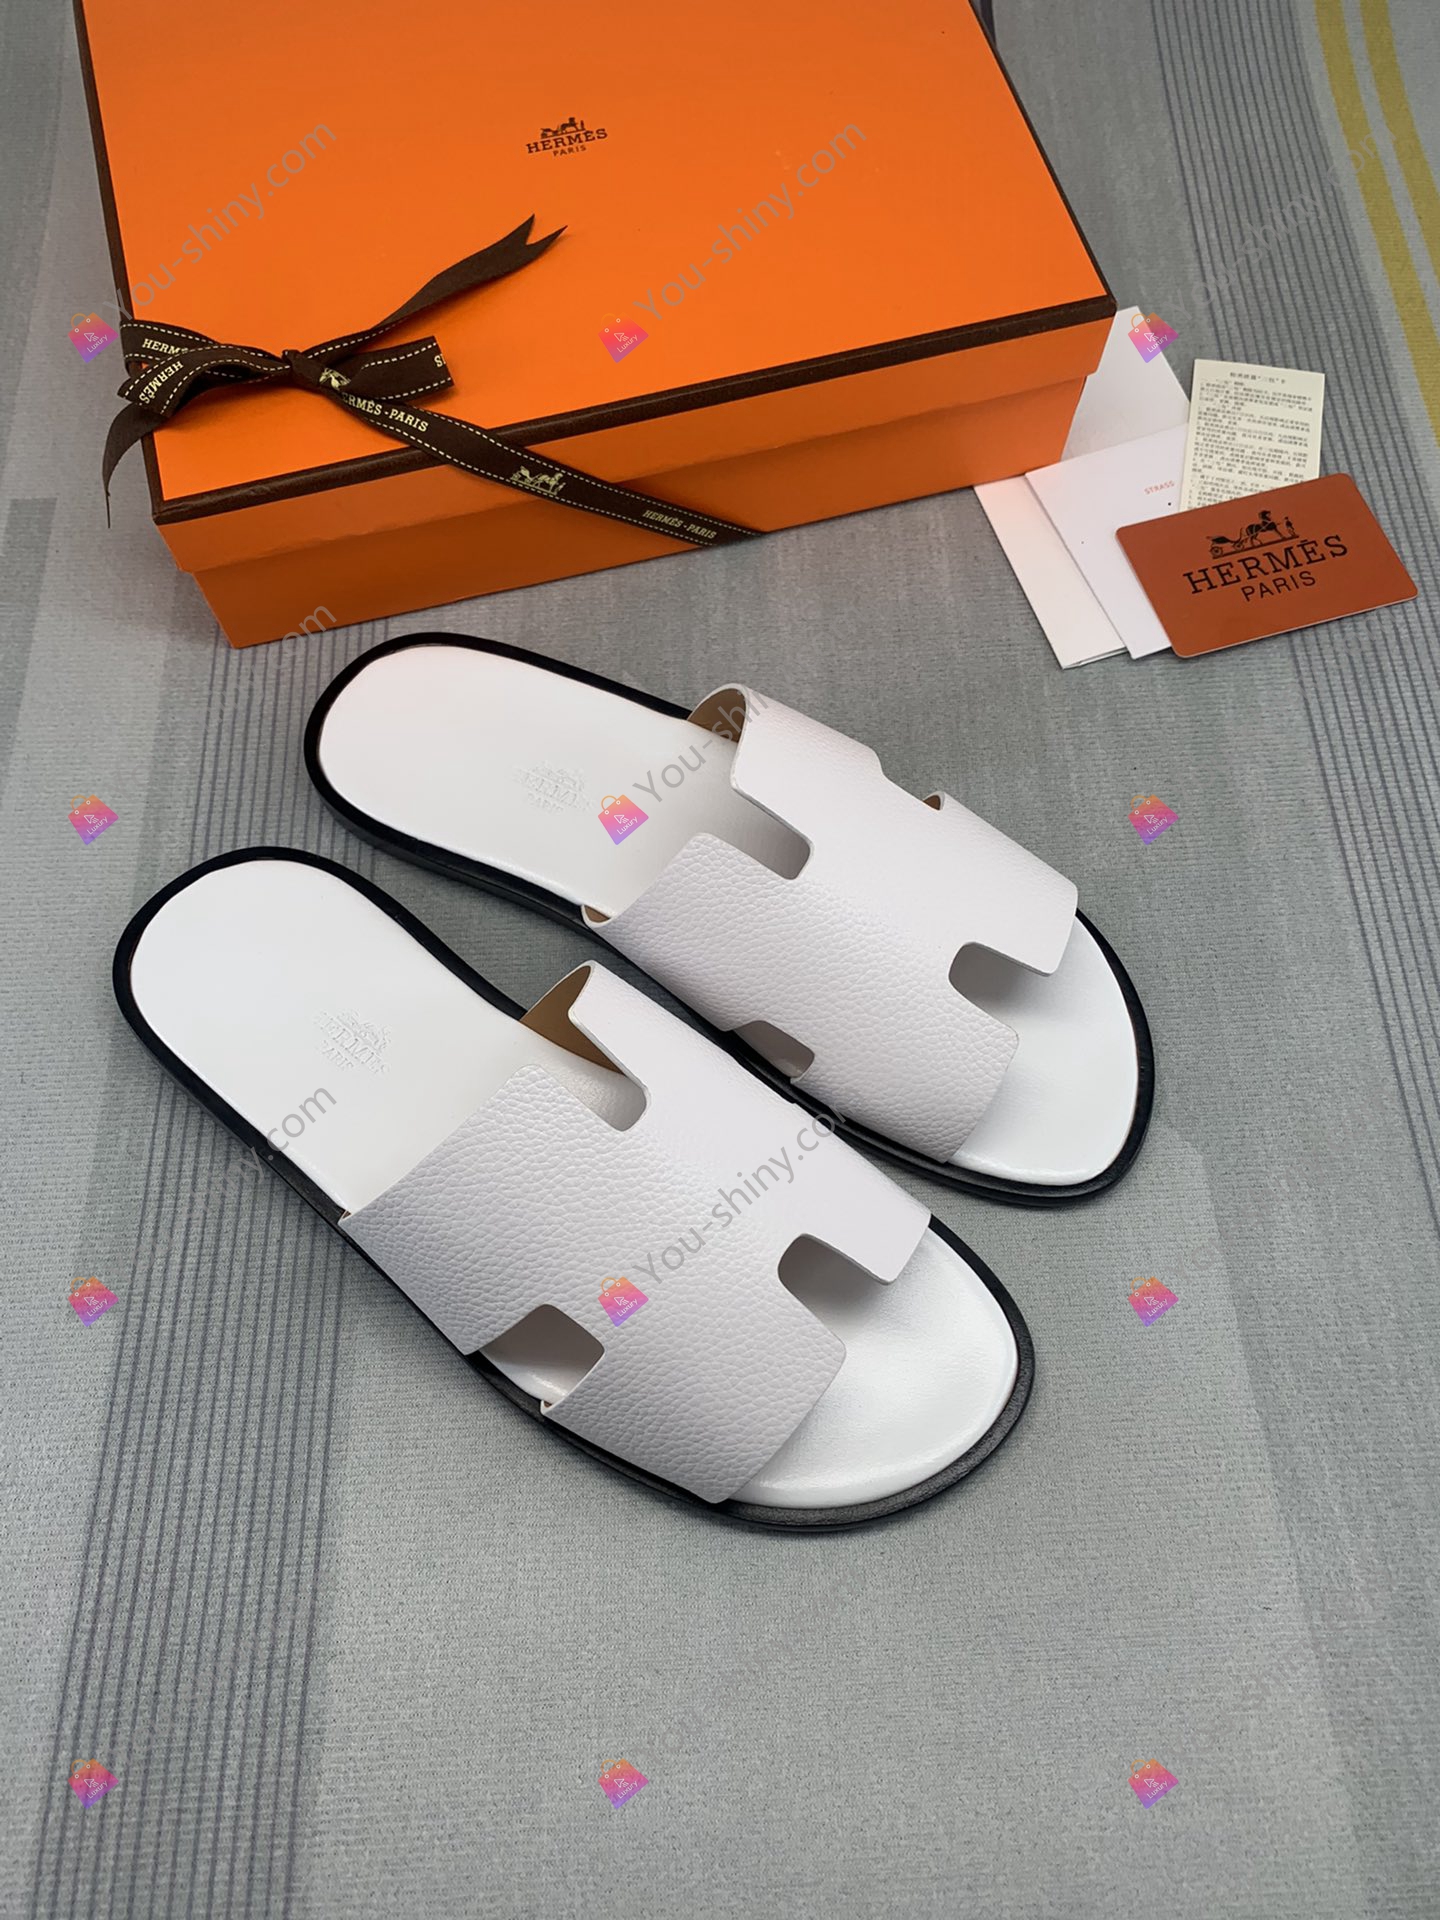 Hermes slippers - You Shiny